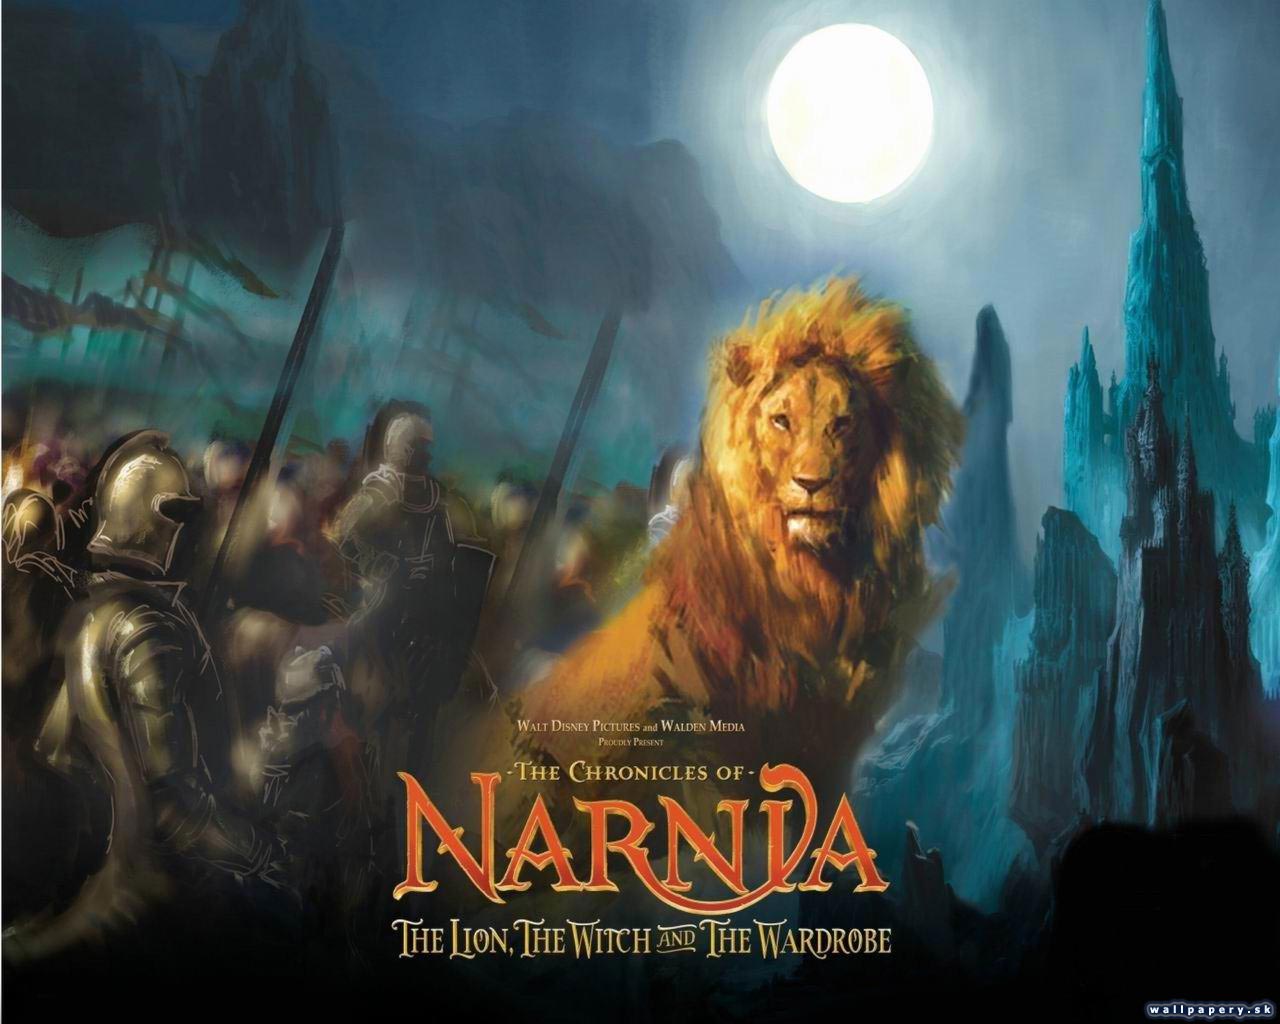 The Chronicles of Narnia: The Lion, The Witch and the Wardrobe - wallpaper 1